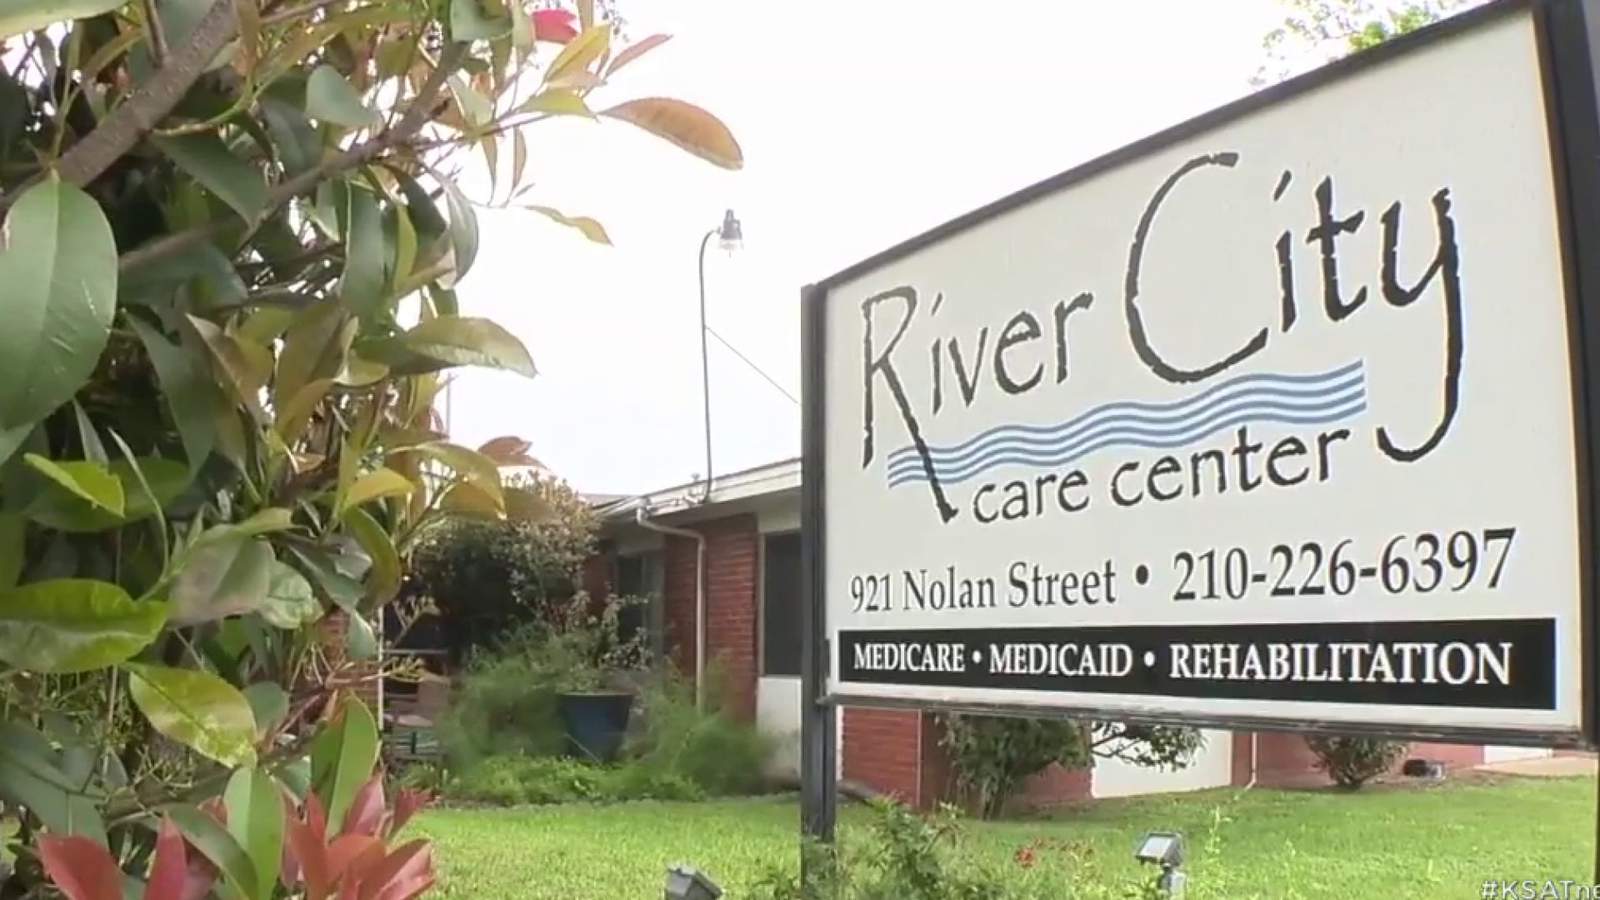 San Antonio’s plan to move COVID-19 patients from area nursing homes to 2 facilities slammed by county commissioner